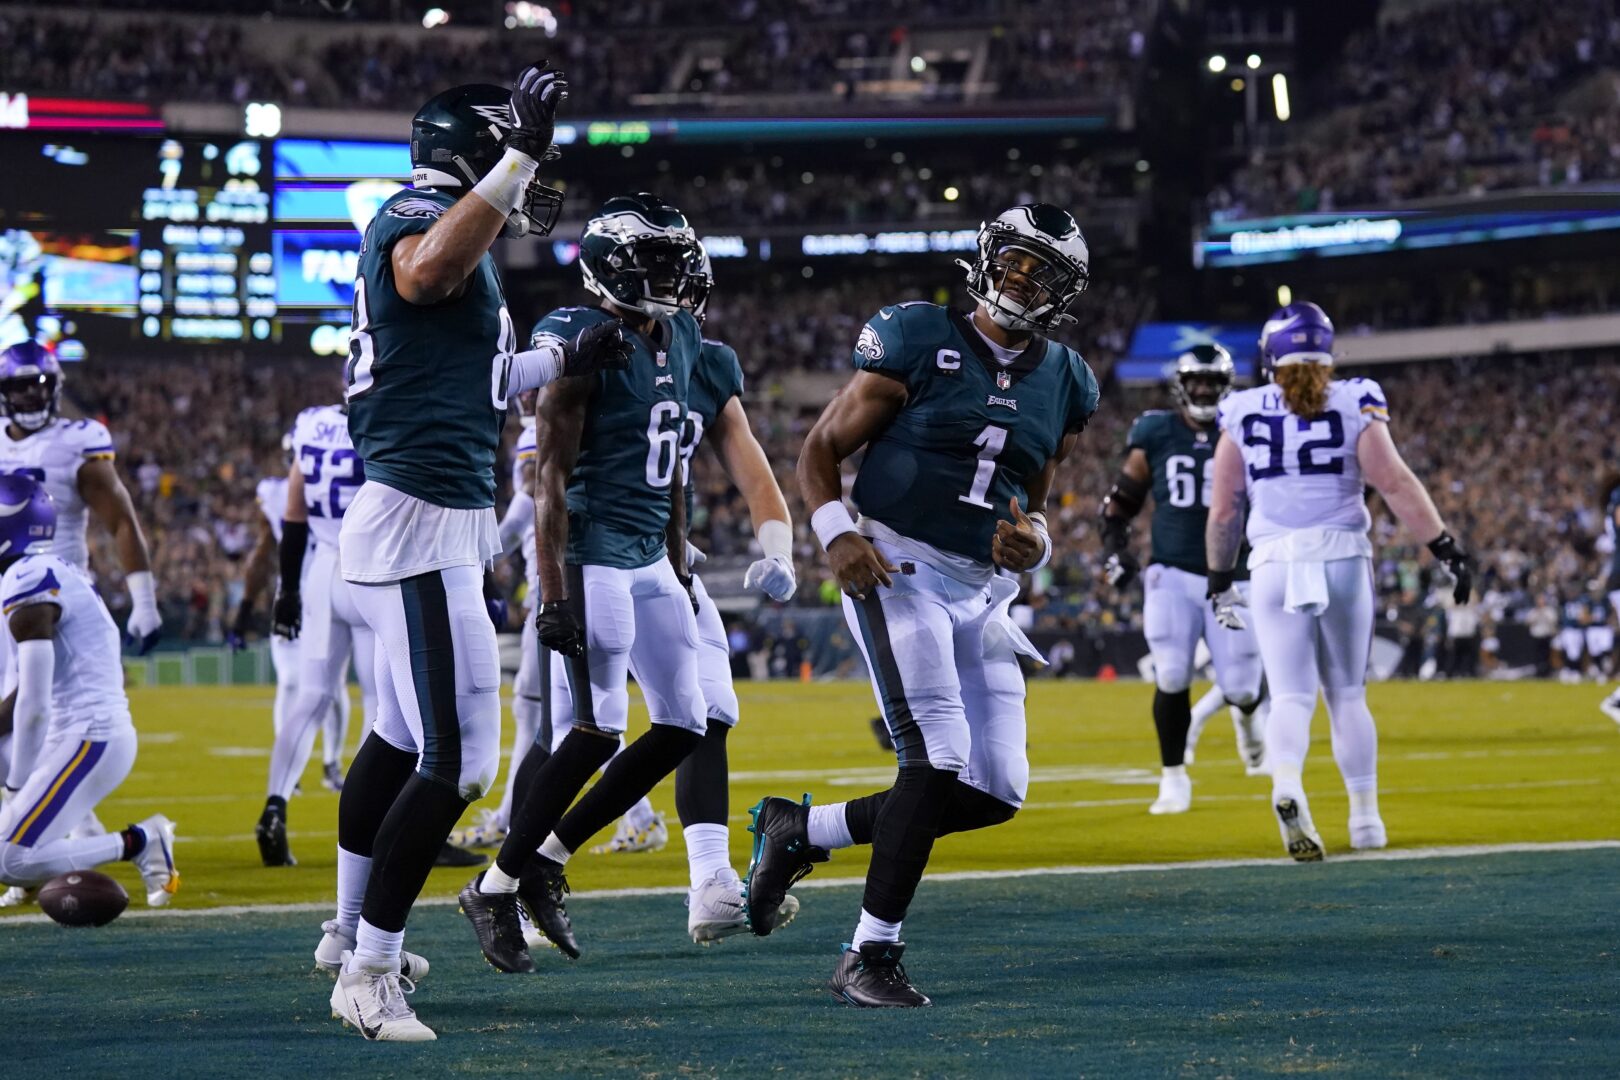 49ers news: Eagles will host the NFC Championship after beating